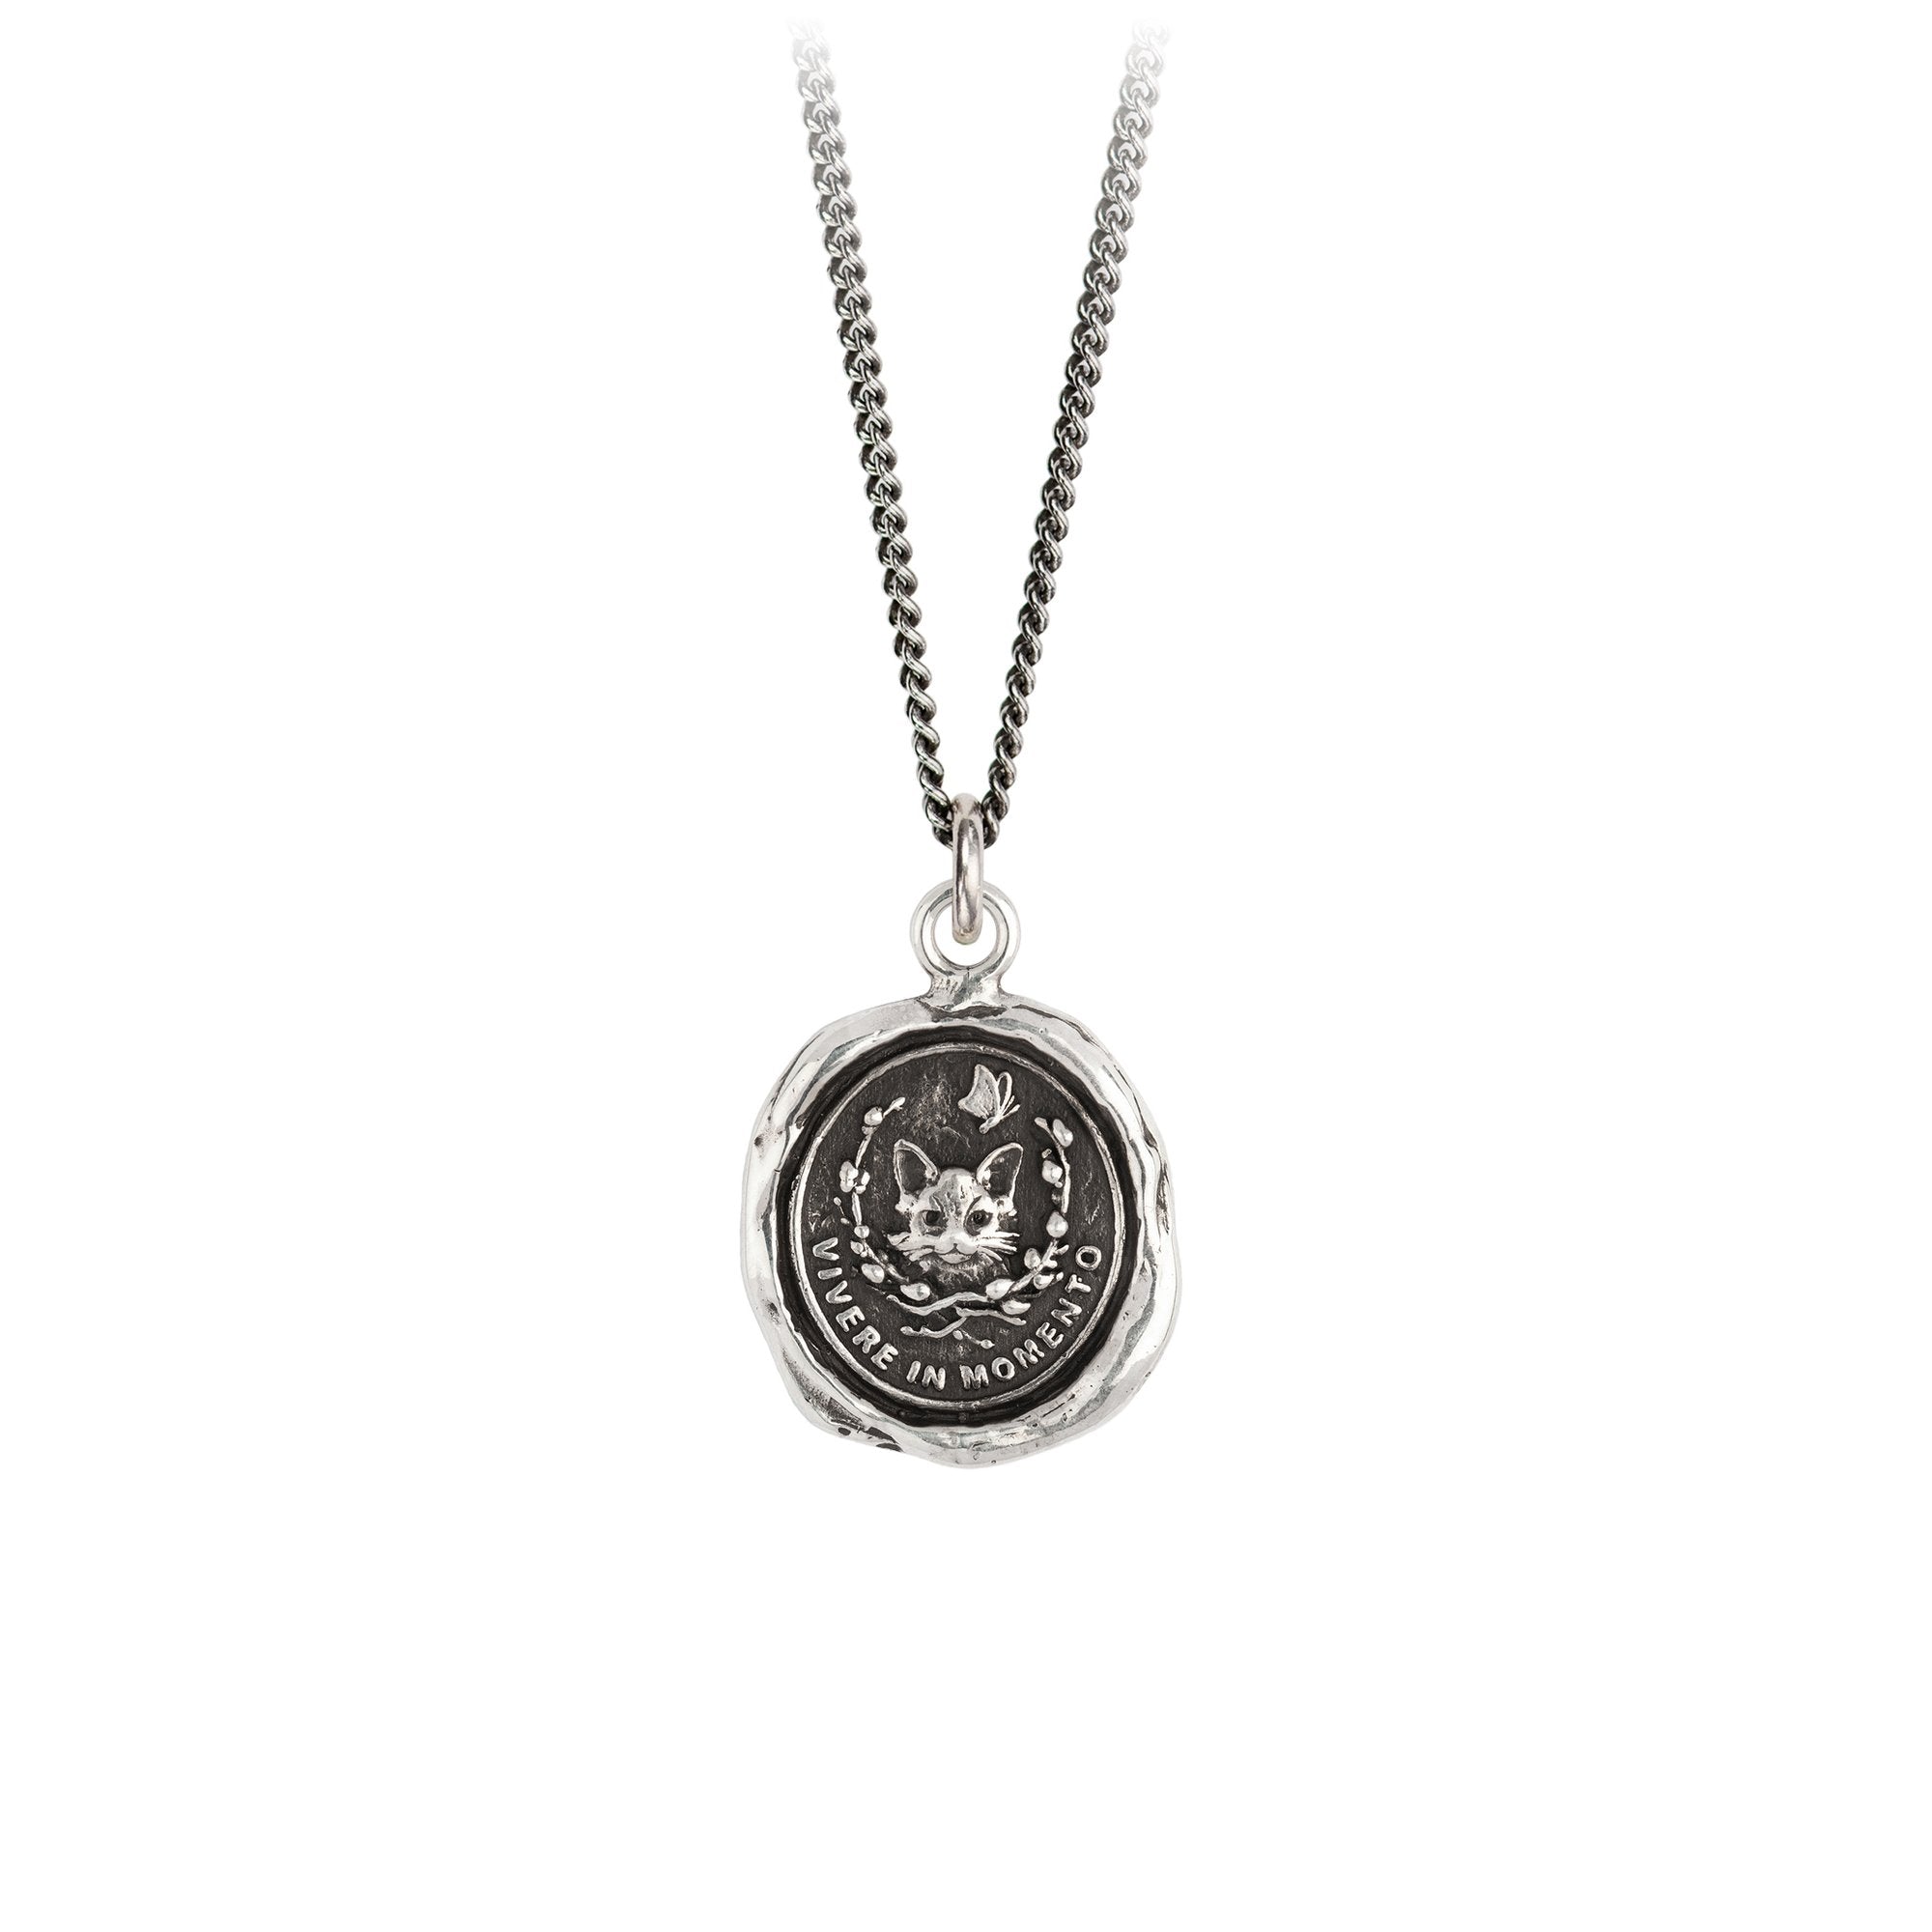 Live in the Moment Talisman Necklace